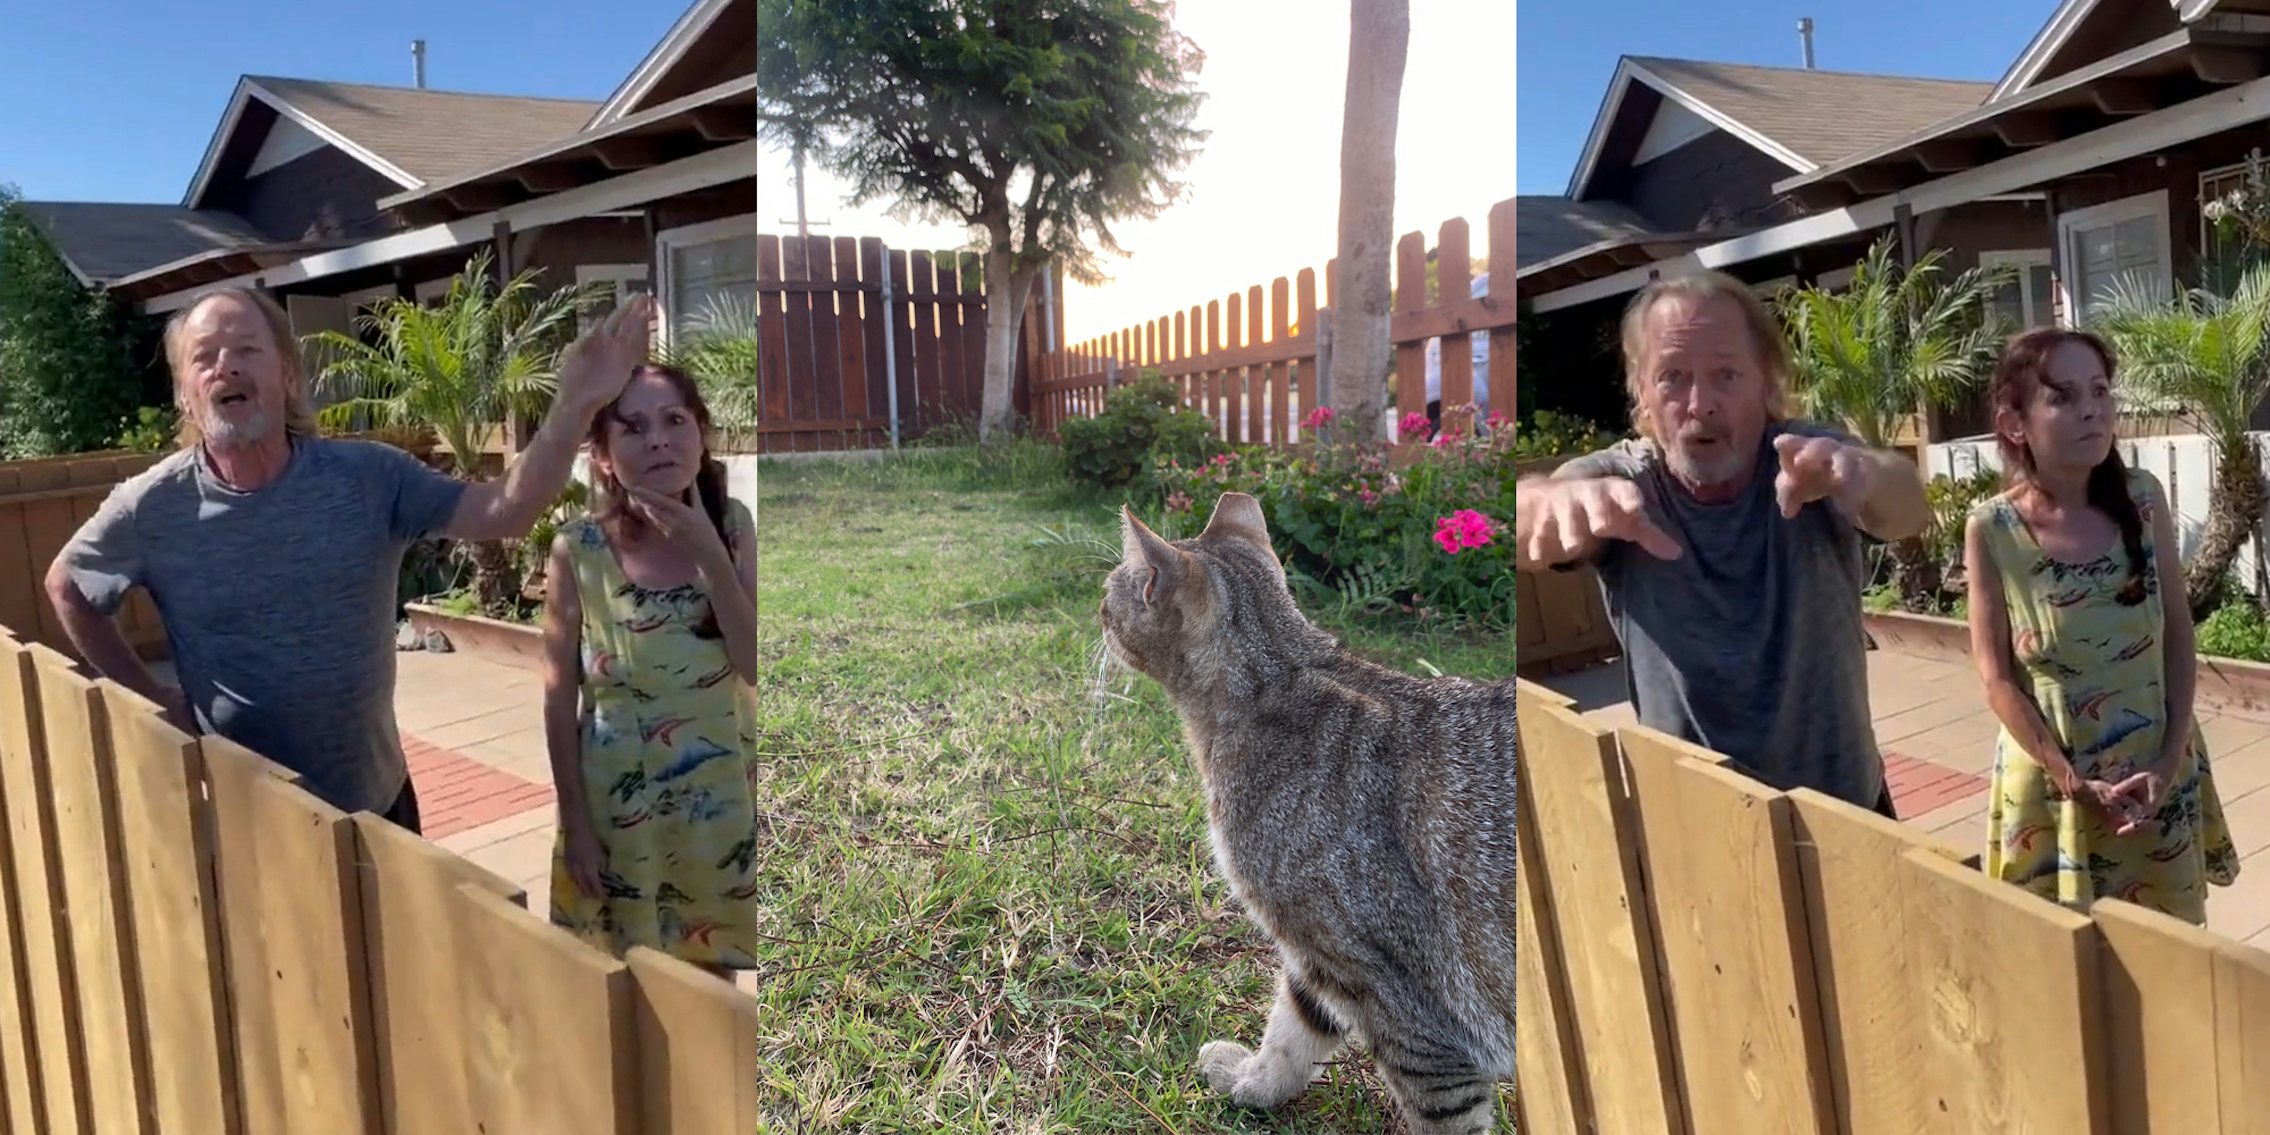 neighbors speaking at fence (l) cat in fenced yard (c) neighbors speaking at fence (r)